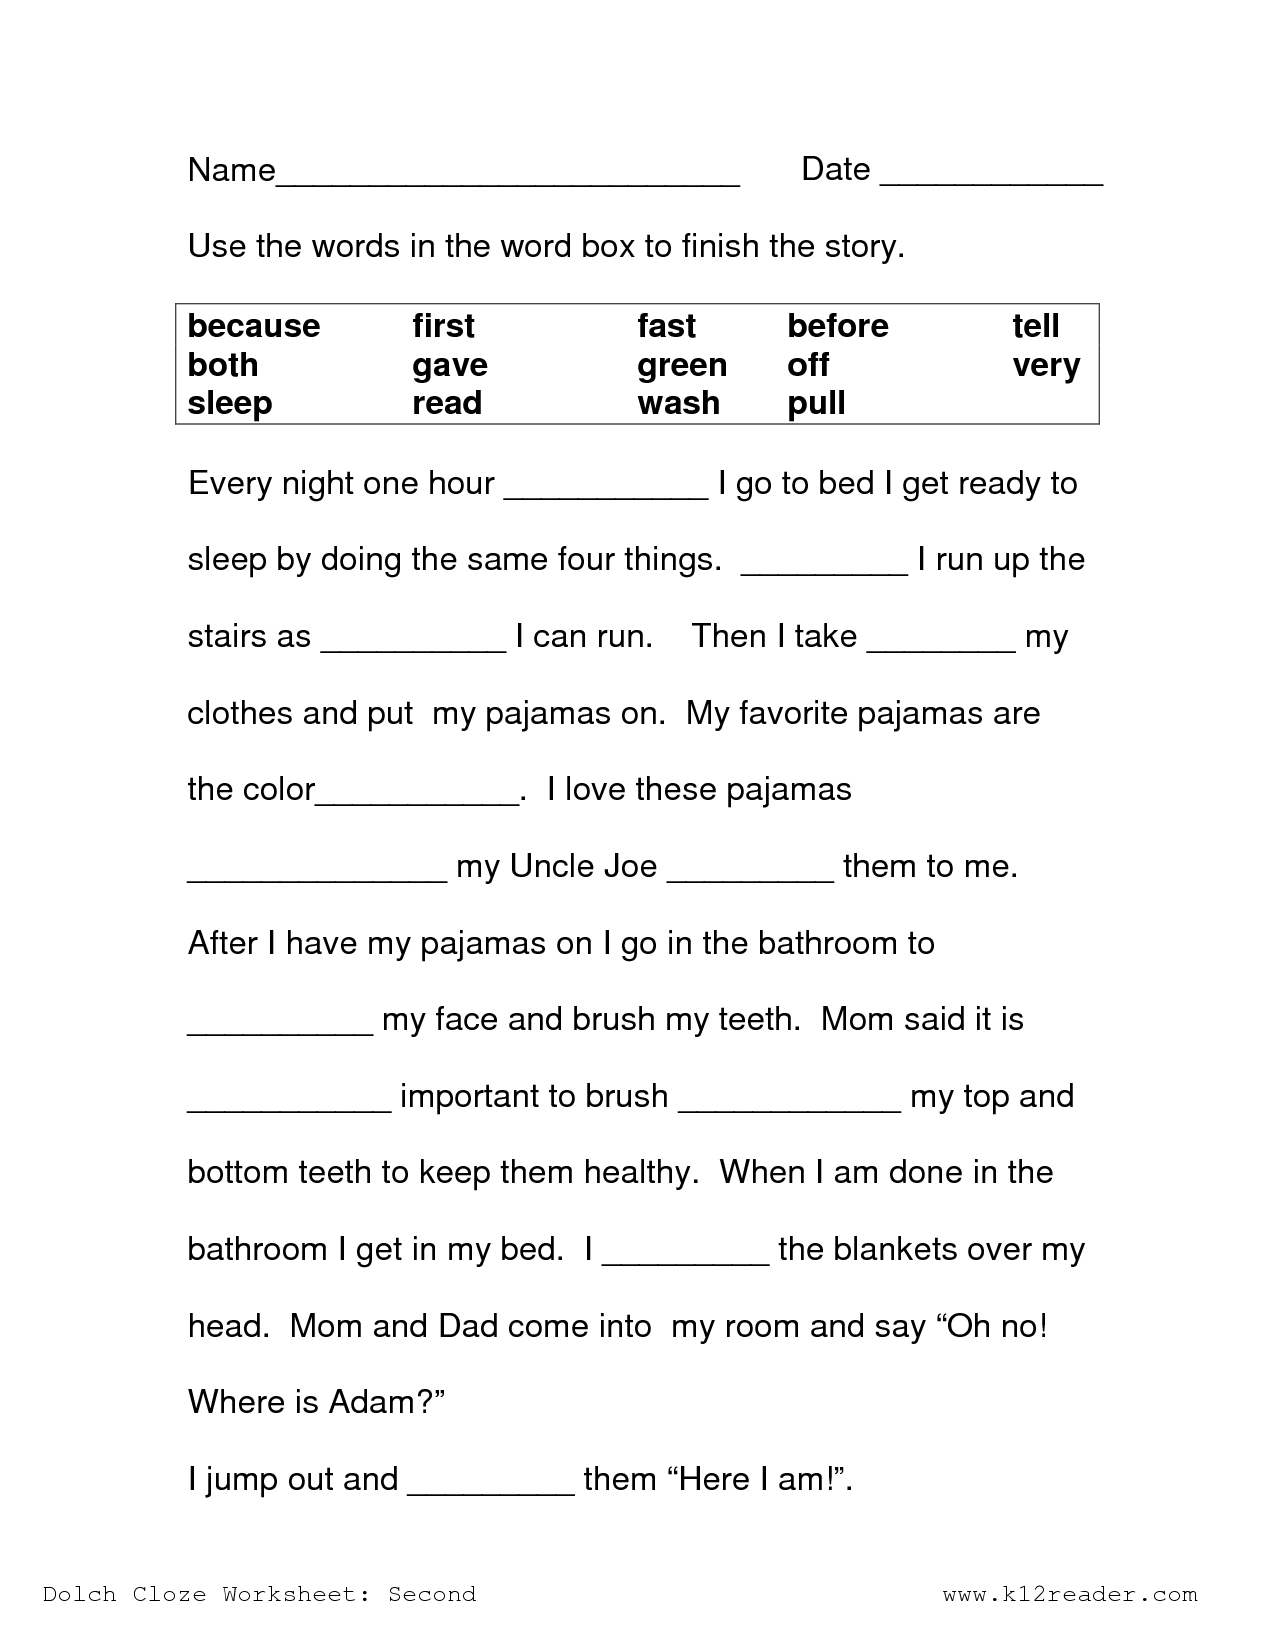 17 Best Images Of Second Grade Making Inferences Worksheets Inference Graphic Organizer